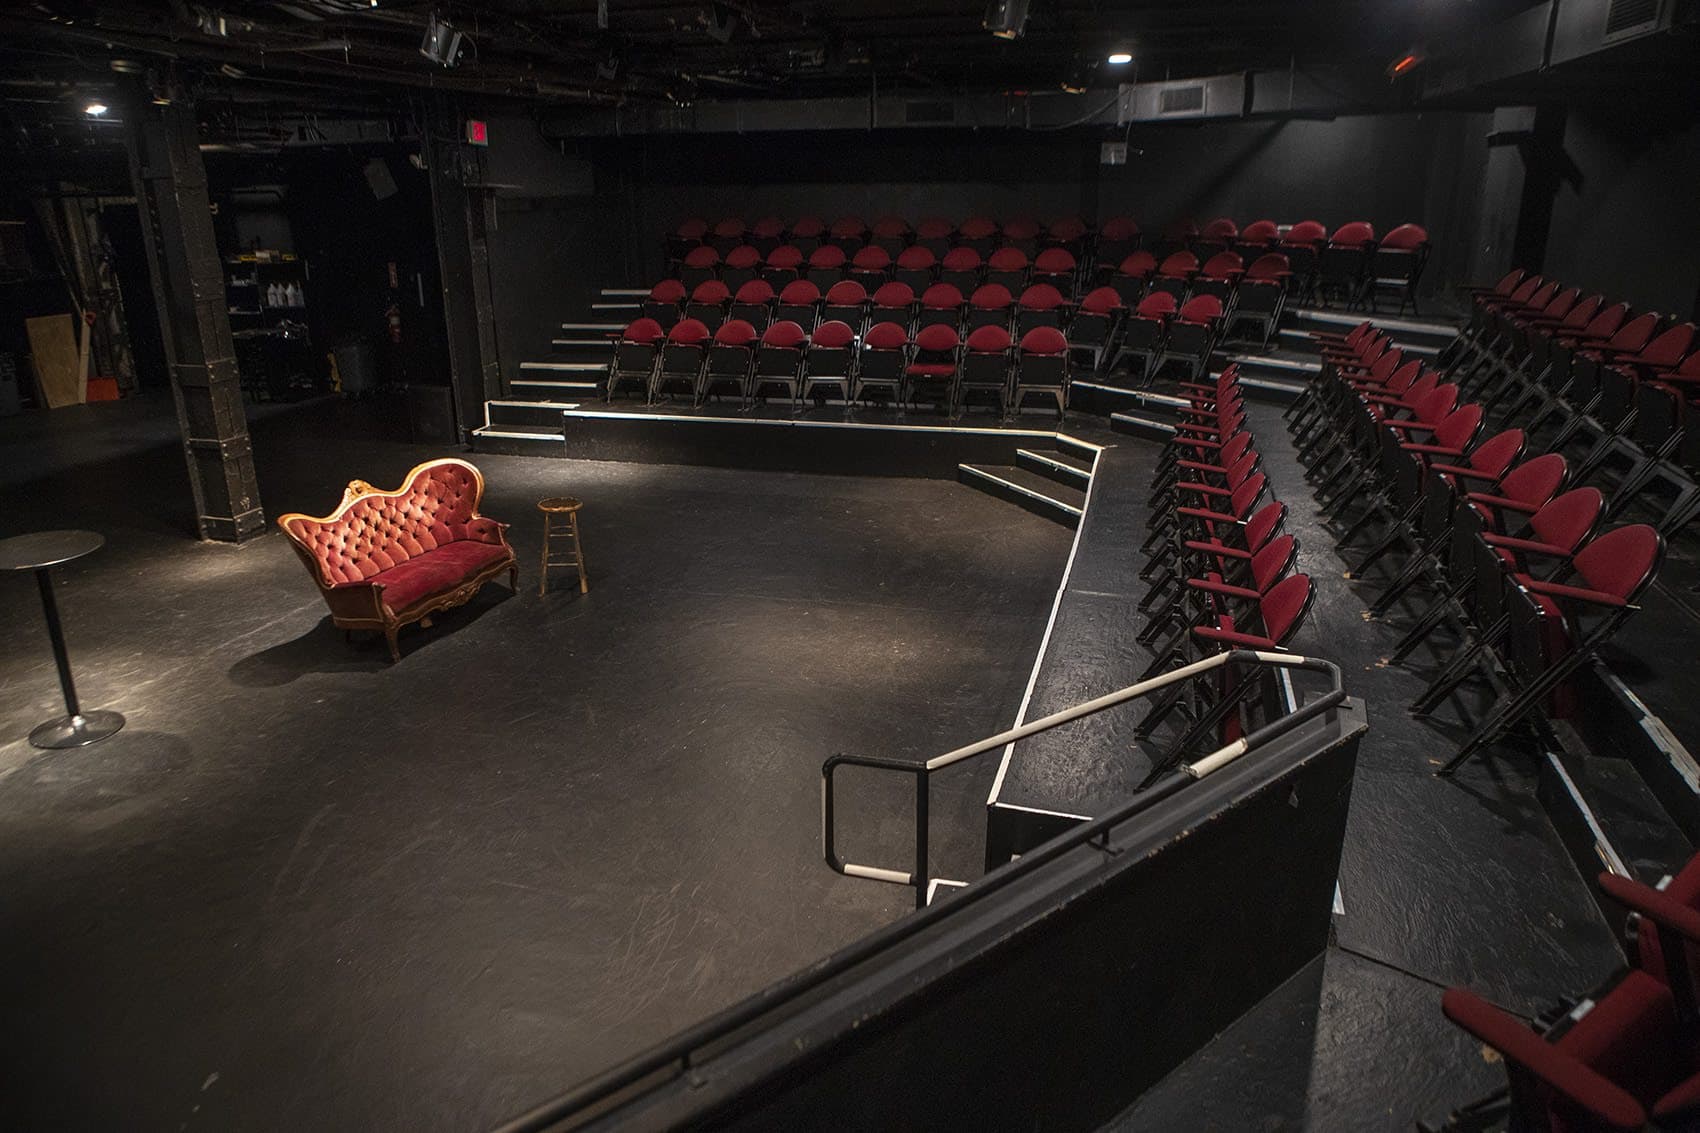 Boston performance venues, like the Plaza Theatre at the Boston Center for the Arts, are not racing to resume performances, despite new state guidelines allowing 50% capacity. (Jesse Costa/WBUR)